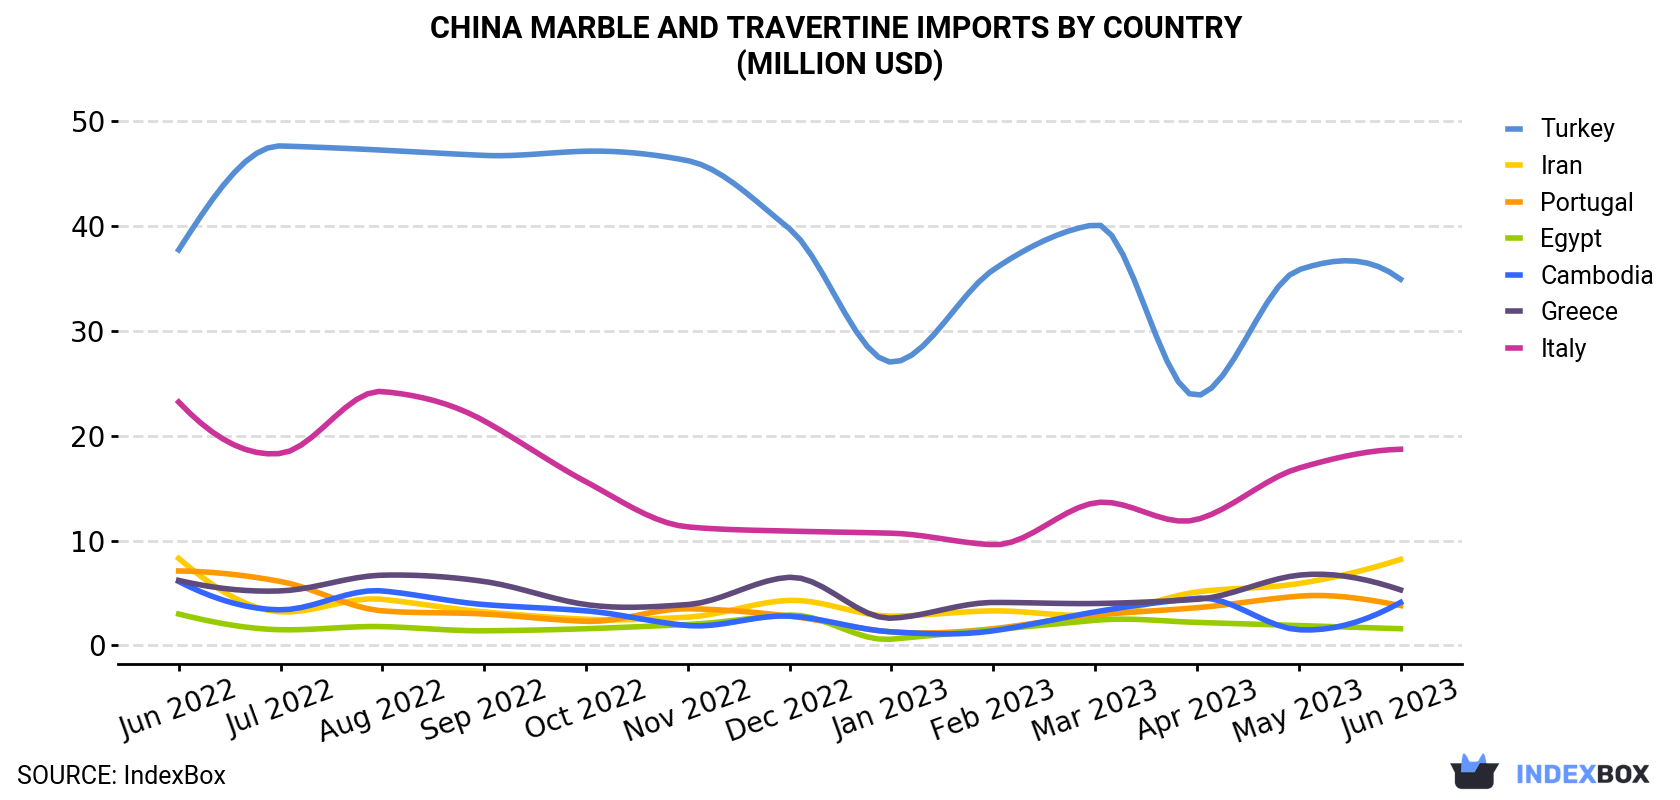 China Marble And Travertine Imports By Country (Million USD)